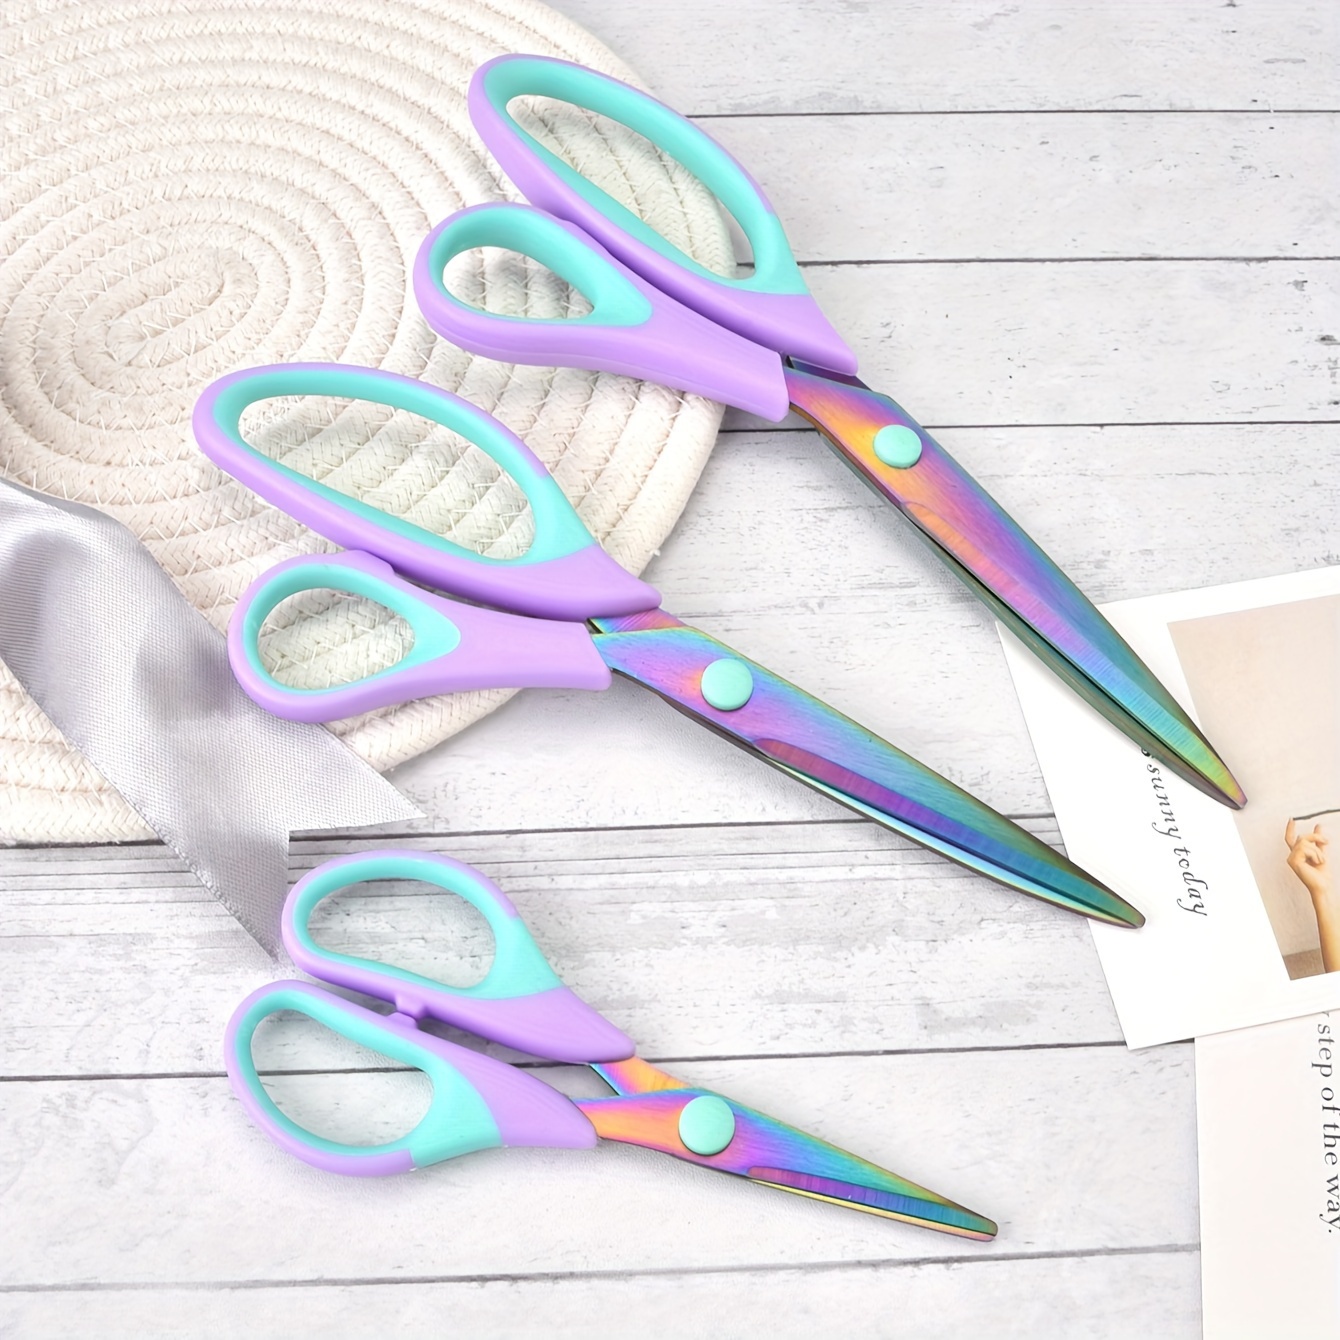 

3pcs, Craft Scissors, All Purpose Sharp Titanium Blades Shears, Rubber Soft Grip Handle, Multipurpose Fabric Scissors Tool Set Great For Office, Sewing, Arts, School And Home Supplies